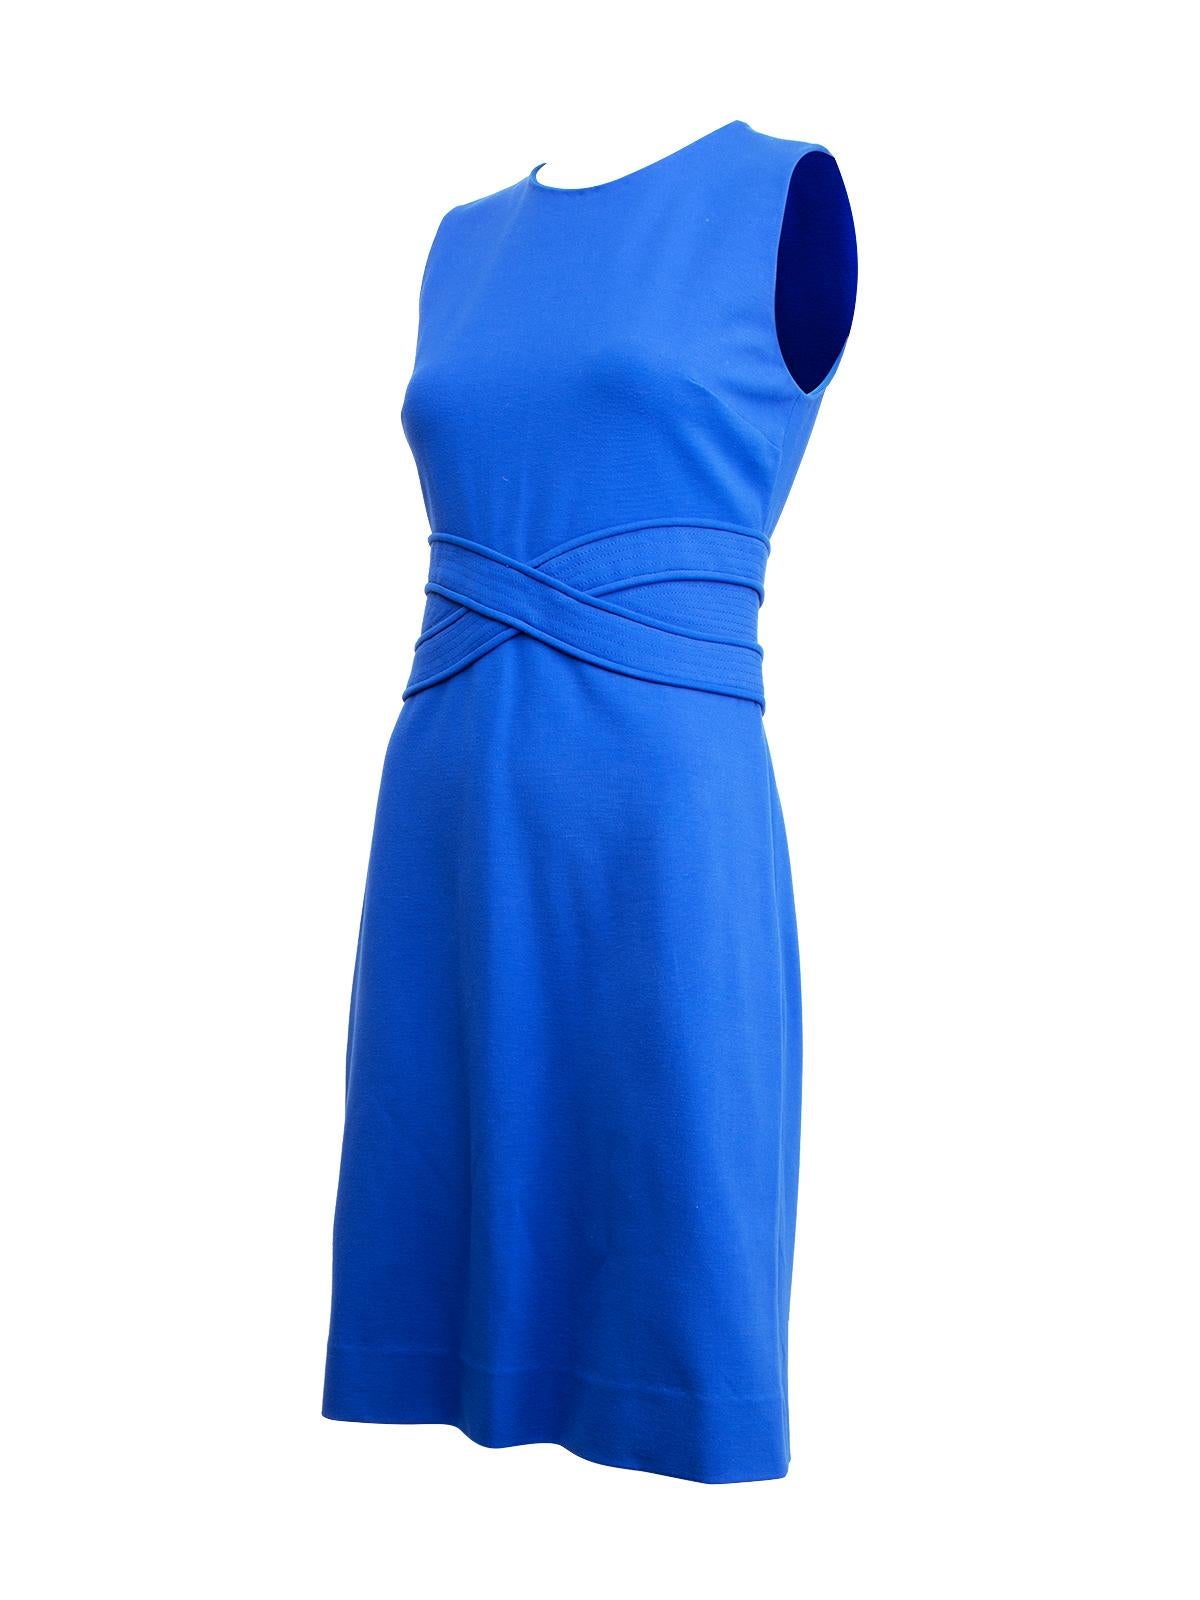 CONDITION is Very good. Minimal wear to dress is evident. Minimal signs of piling on this used Diane Von Furstenberg designer resale item. Details Colour - blue Material - viscose Fit- figure-hugging Sleeveless Neckline - round Hemline - knee